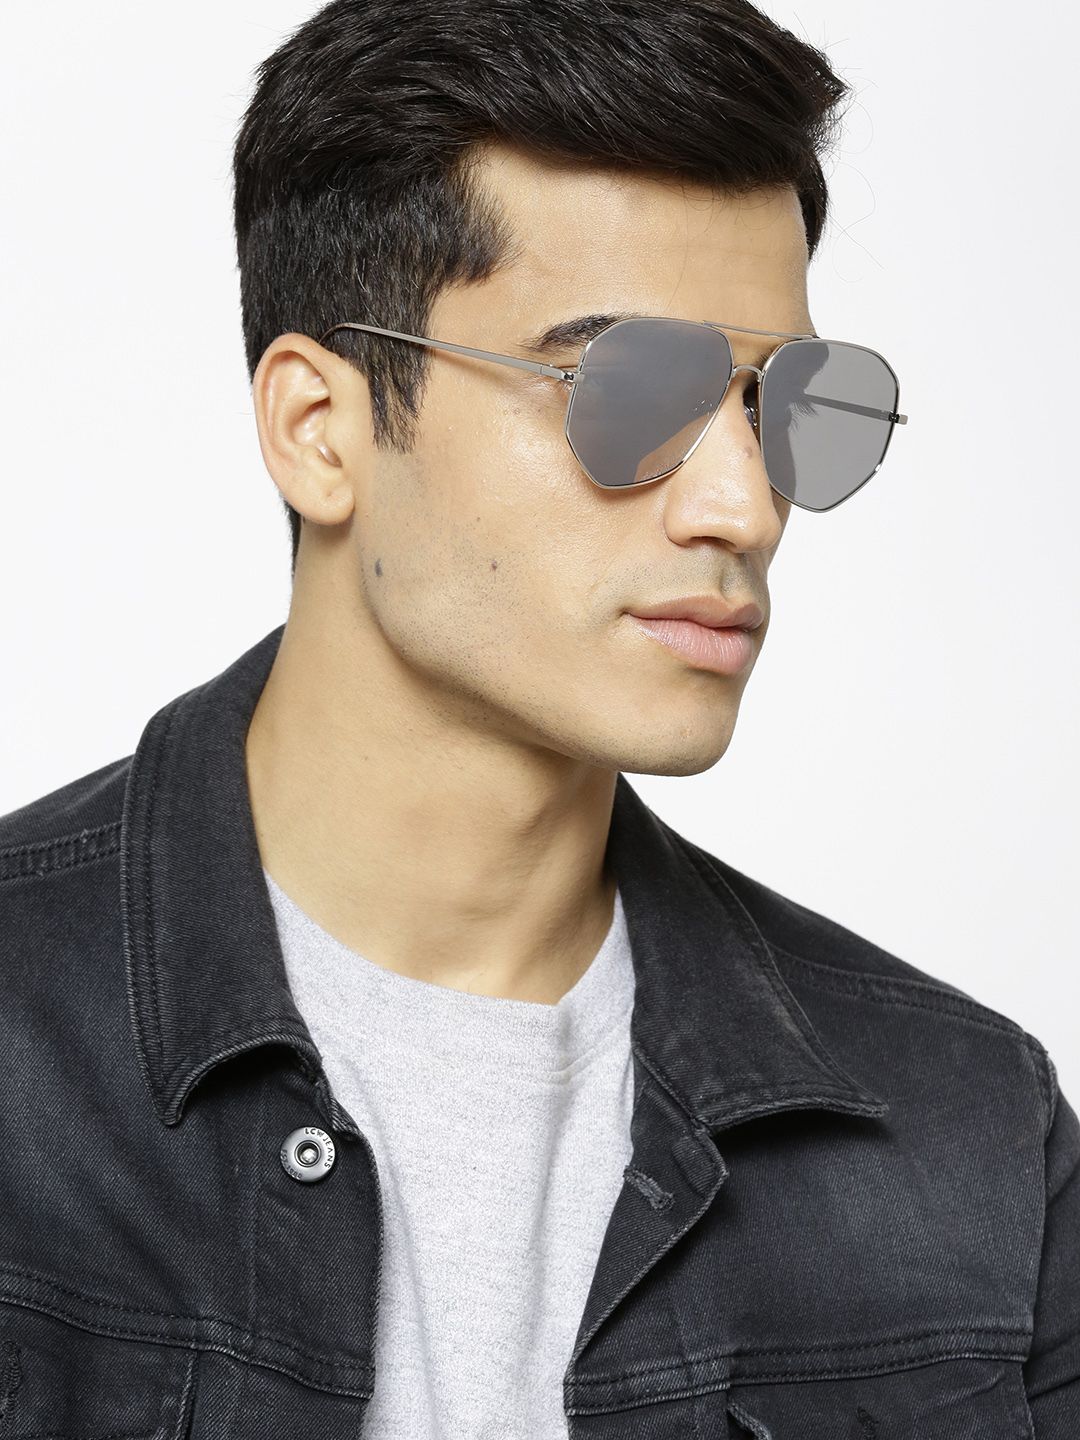 Roadster Unisex Mirrored Oval Sunglasses MFB-PN-PS-T9646 Price in India